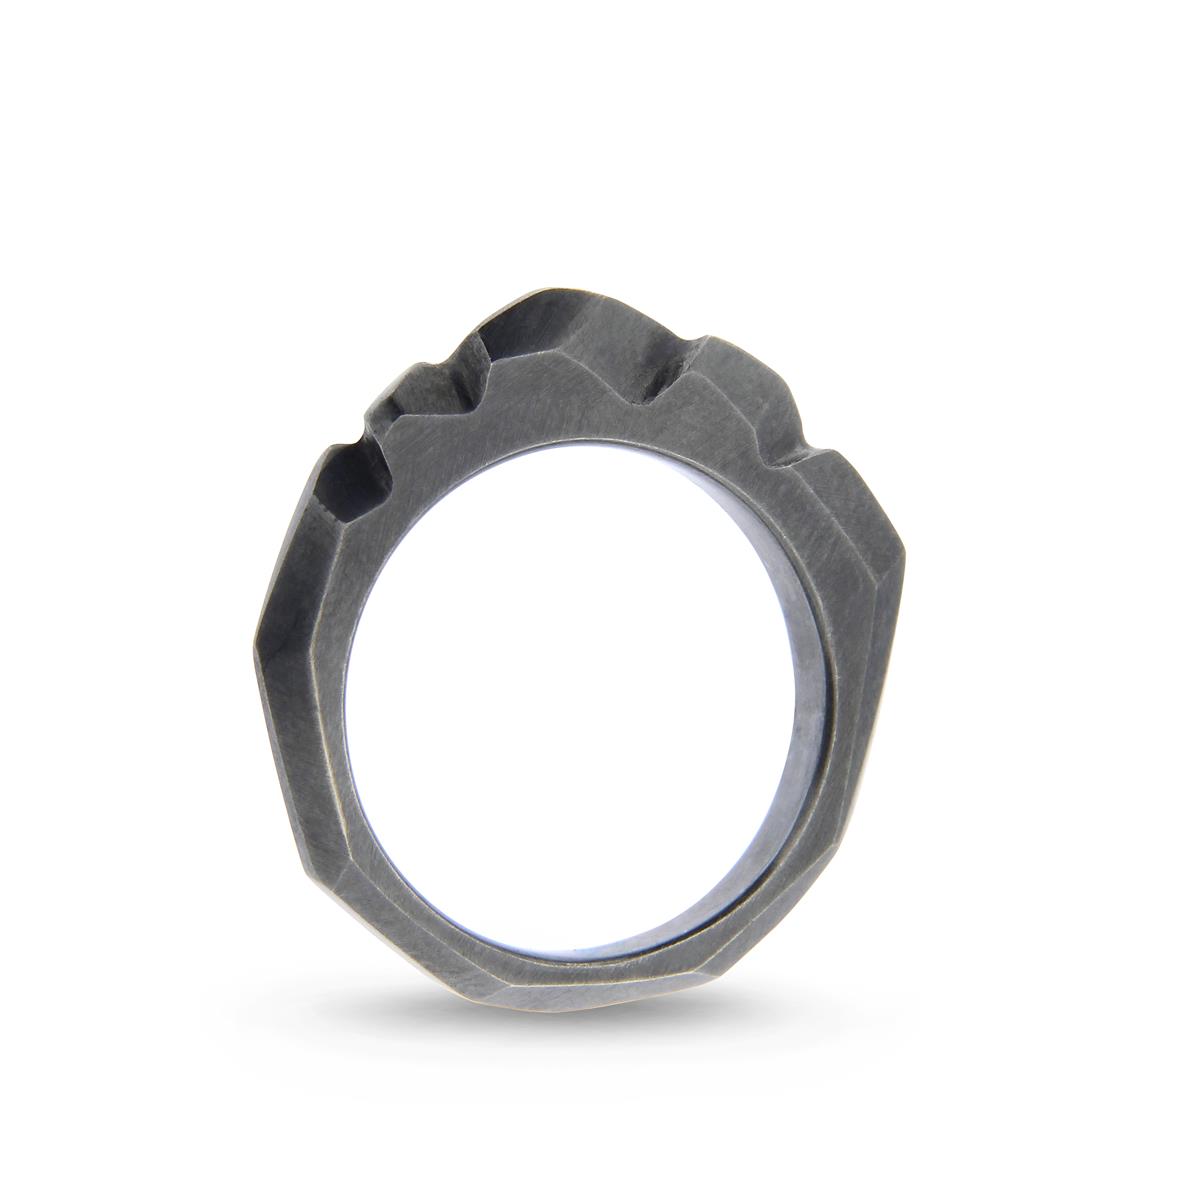 Katie g. Jewellery - Cutting Edge Ring - Mountain - sterling silber oxidiert - 170€